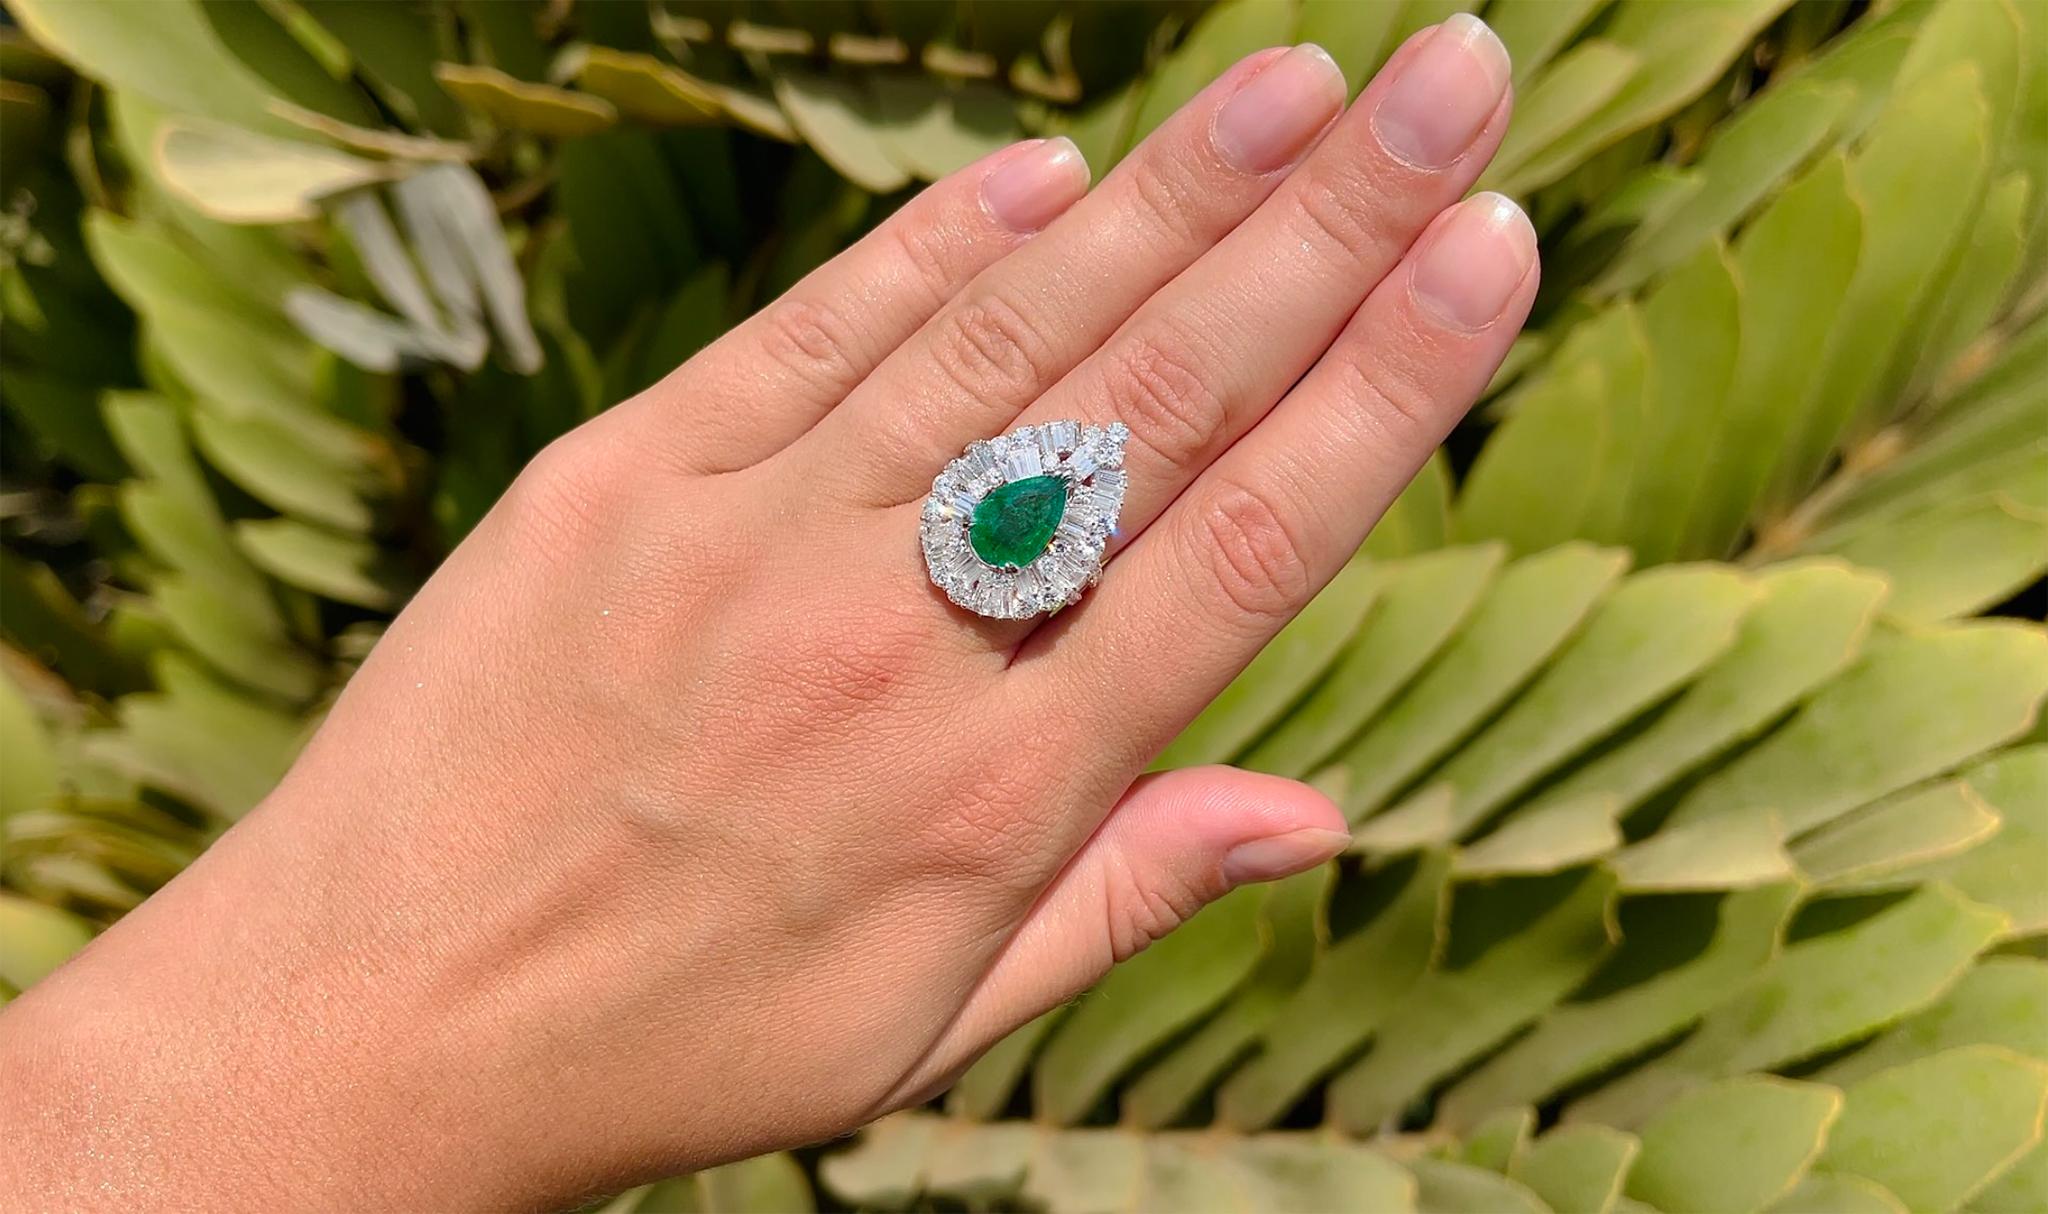 Important Pear Shaped Emerald Ring Set In Diamond Setting. The setting is made from 46 Baguette Diamonds & 43 Round Diamonds.
It comes with an appraisal by GIA G.G.

Pear Emerald = 2.25 Carat
Total Carat Weight of Diamonds is 3.45 Carats
Diamonds